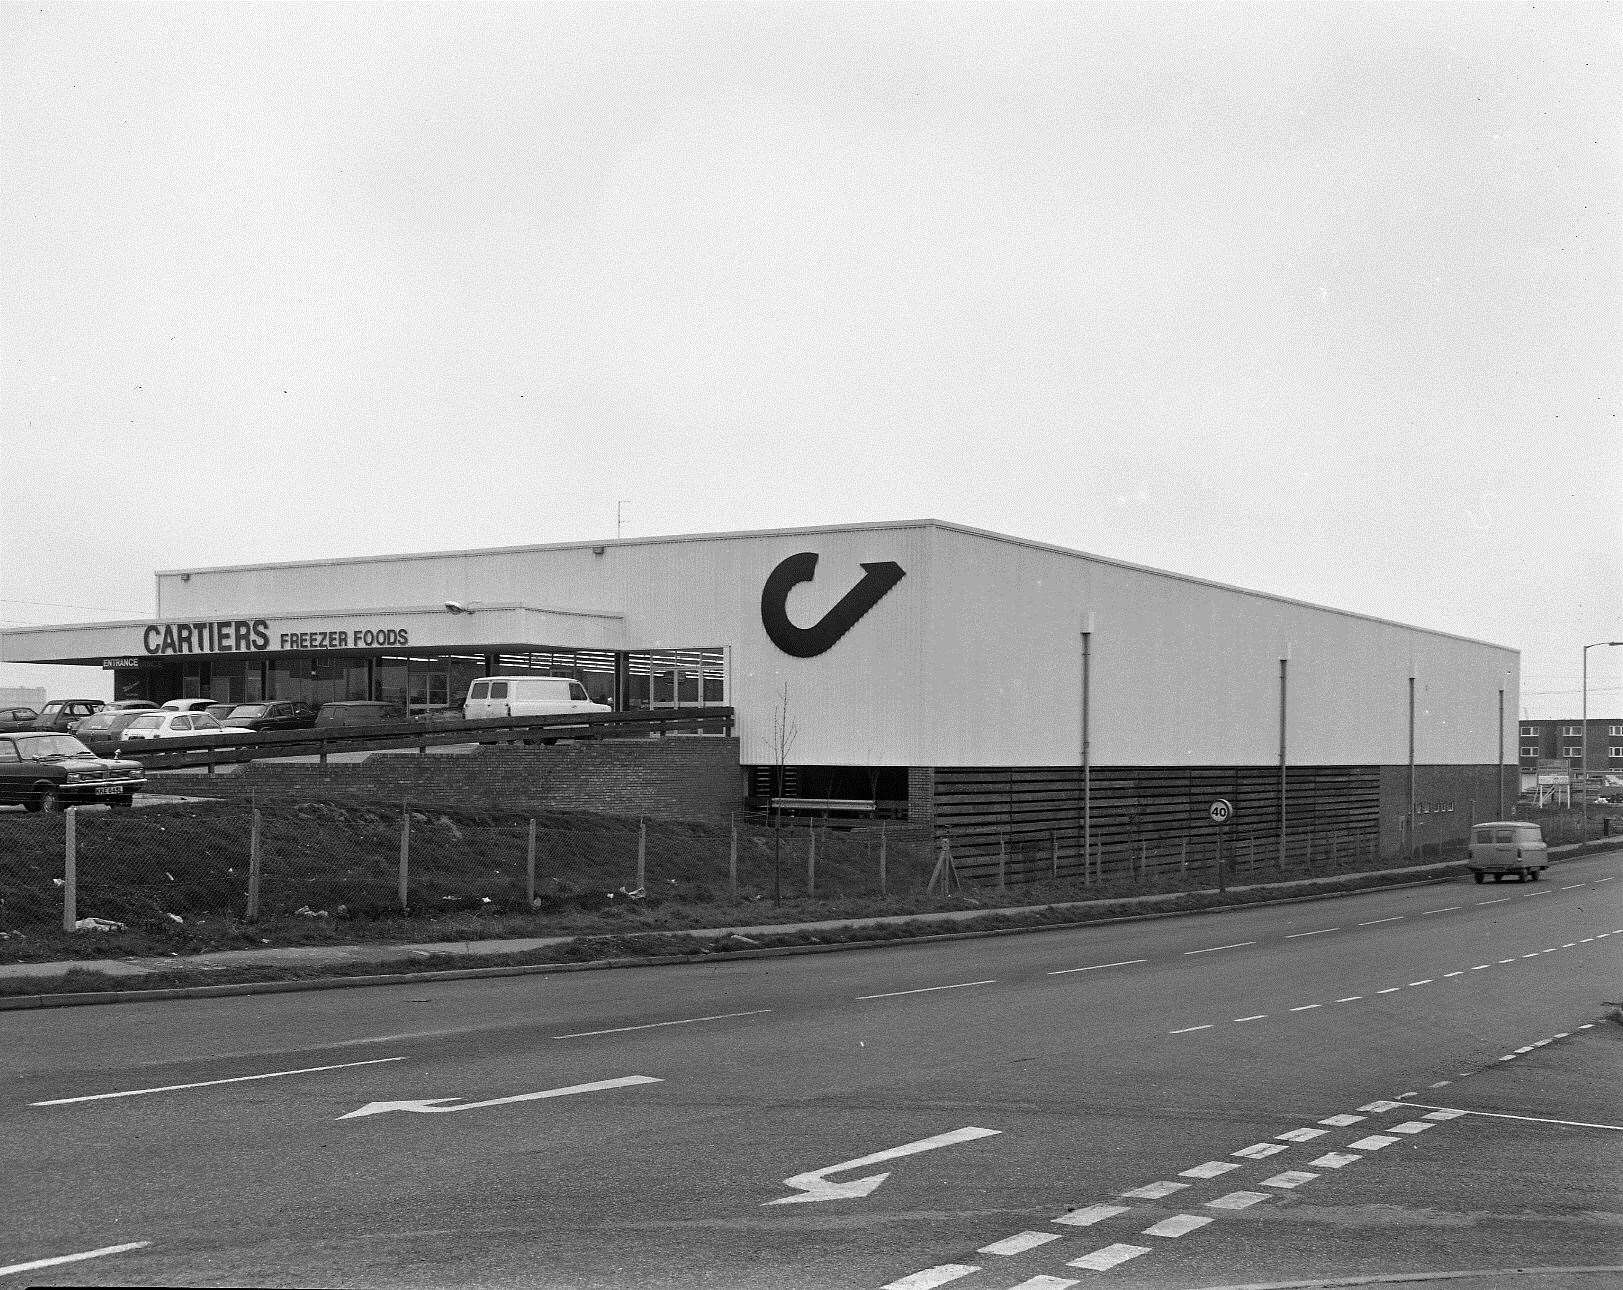 The once-familiar Cartiers store at the corner of Brookfield Road in 1976. Picture: Steve Salter